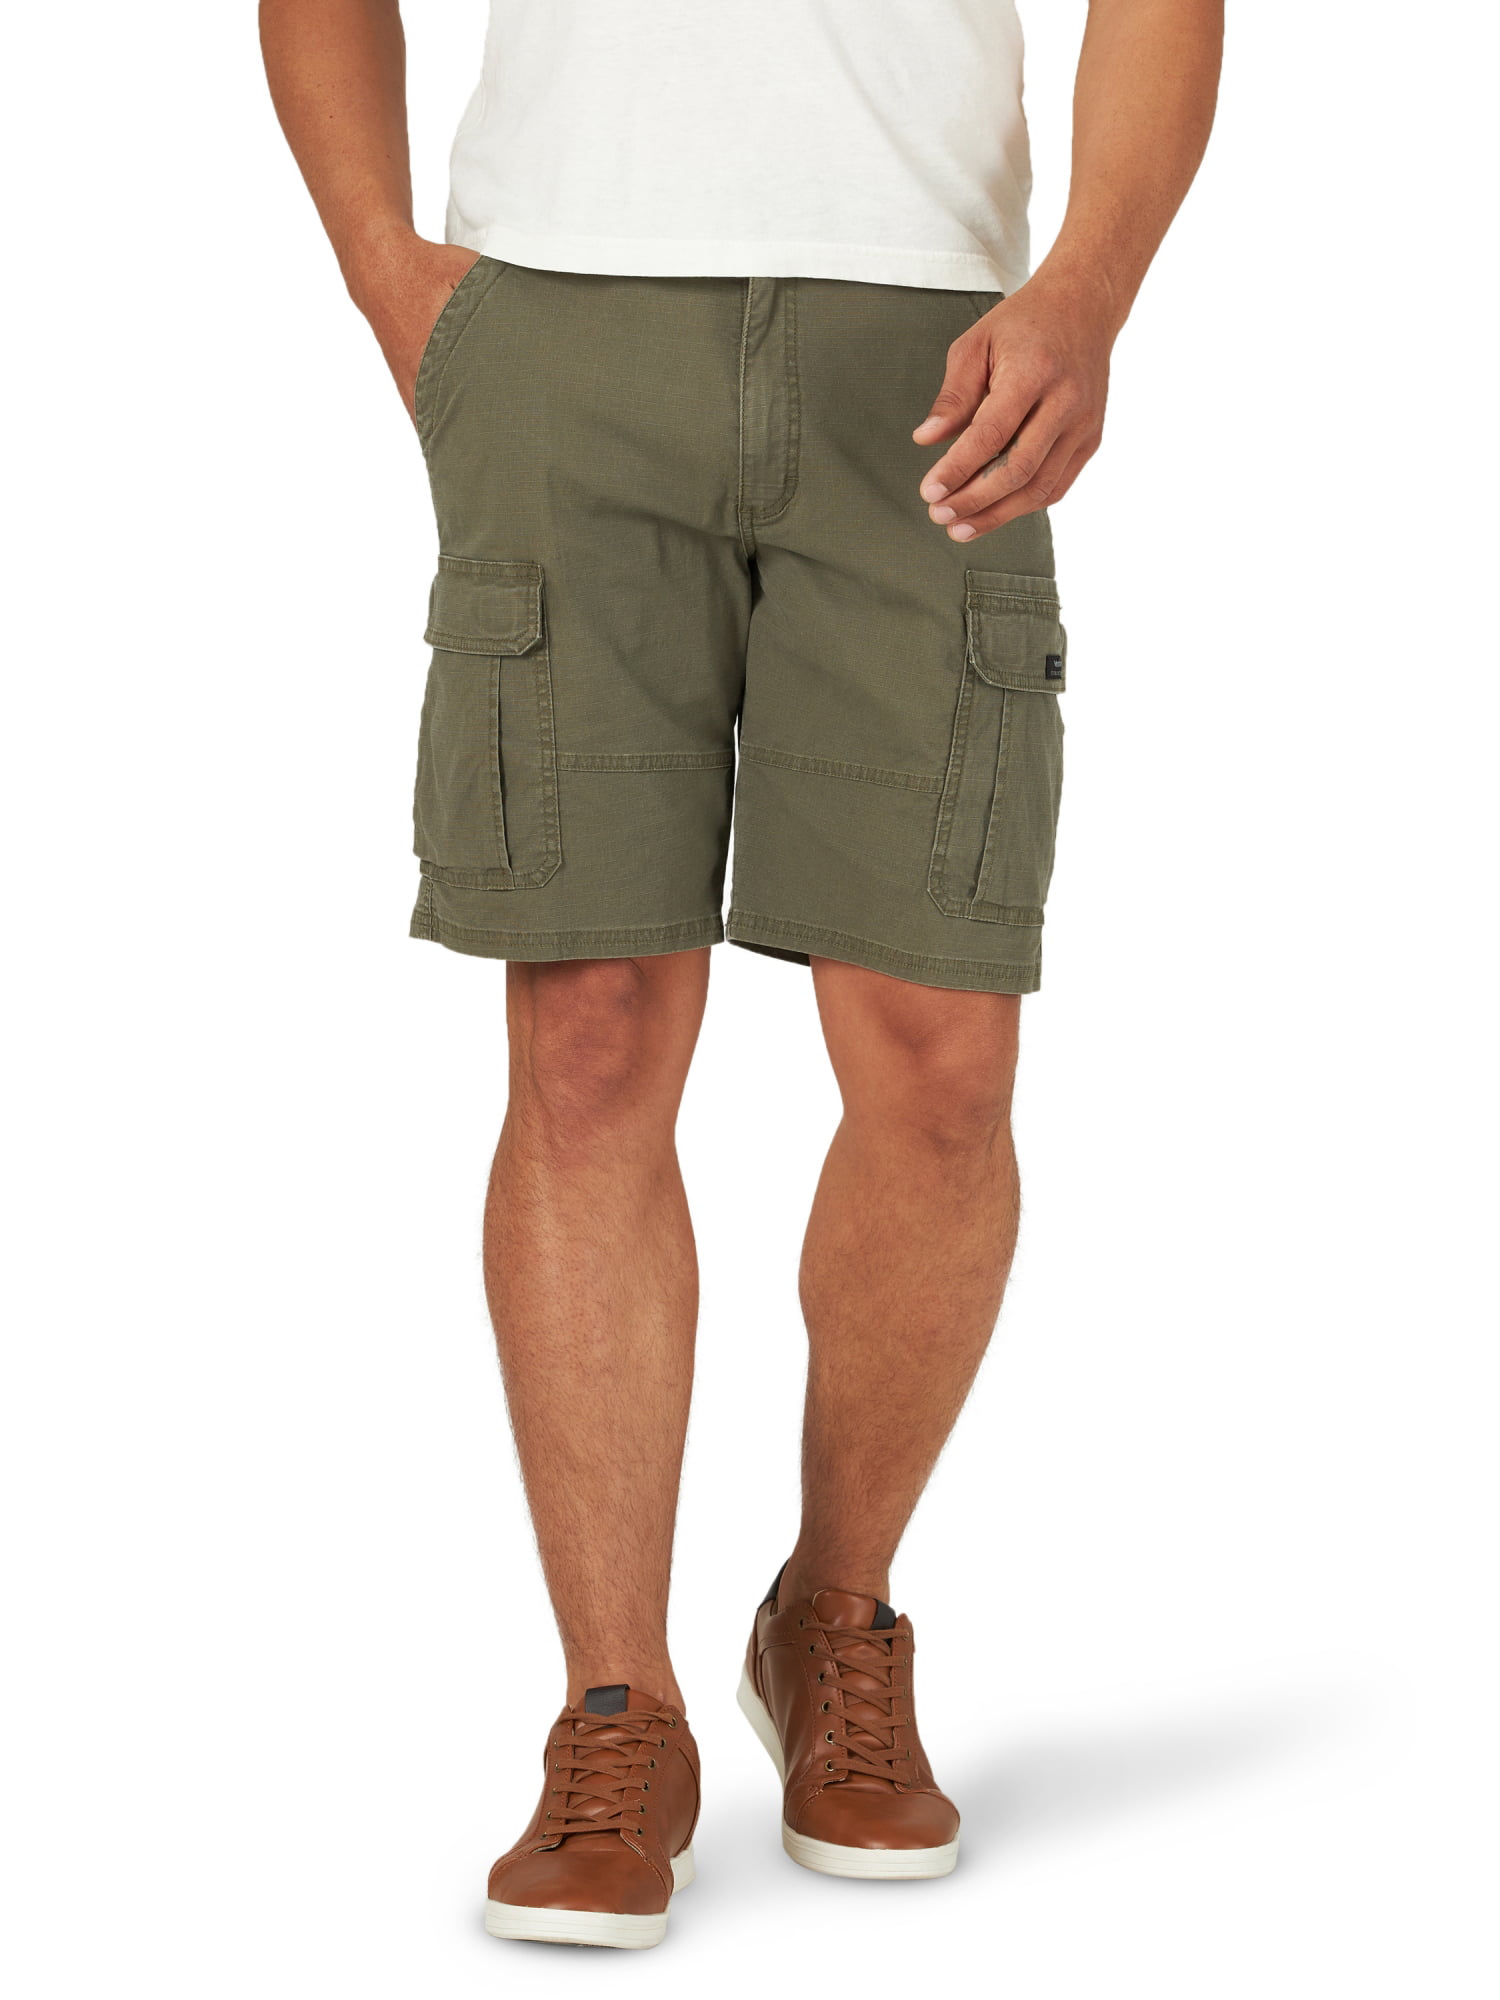 NWT MEN PLUS SIZE BIG AND TALL 14" LONG CARGO SHORTS %100 COTTON SIZE 44-68 